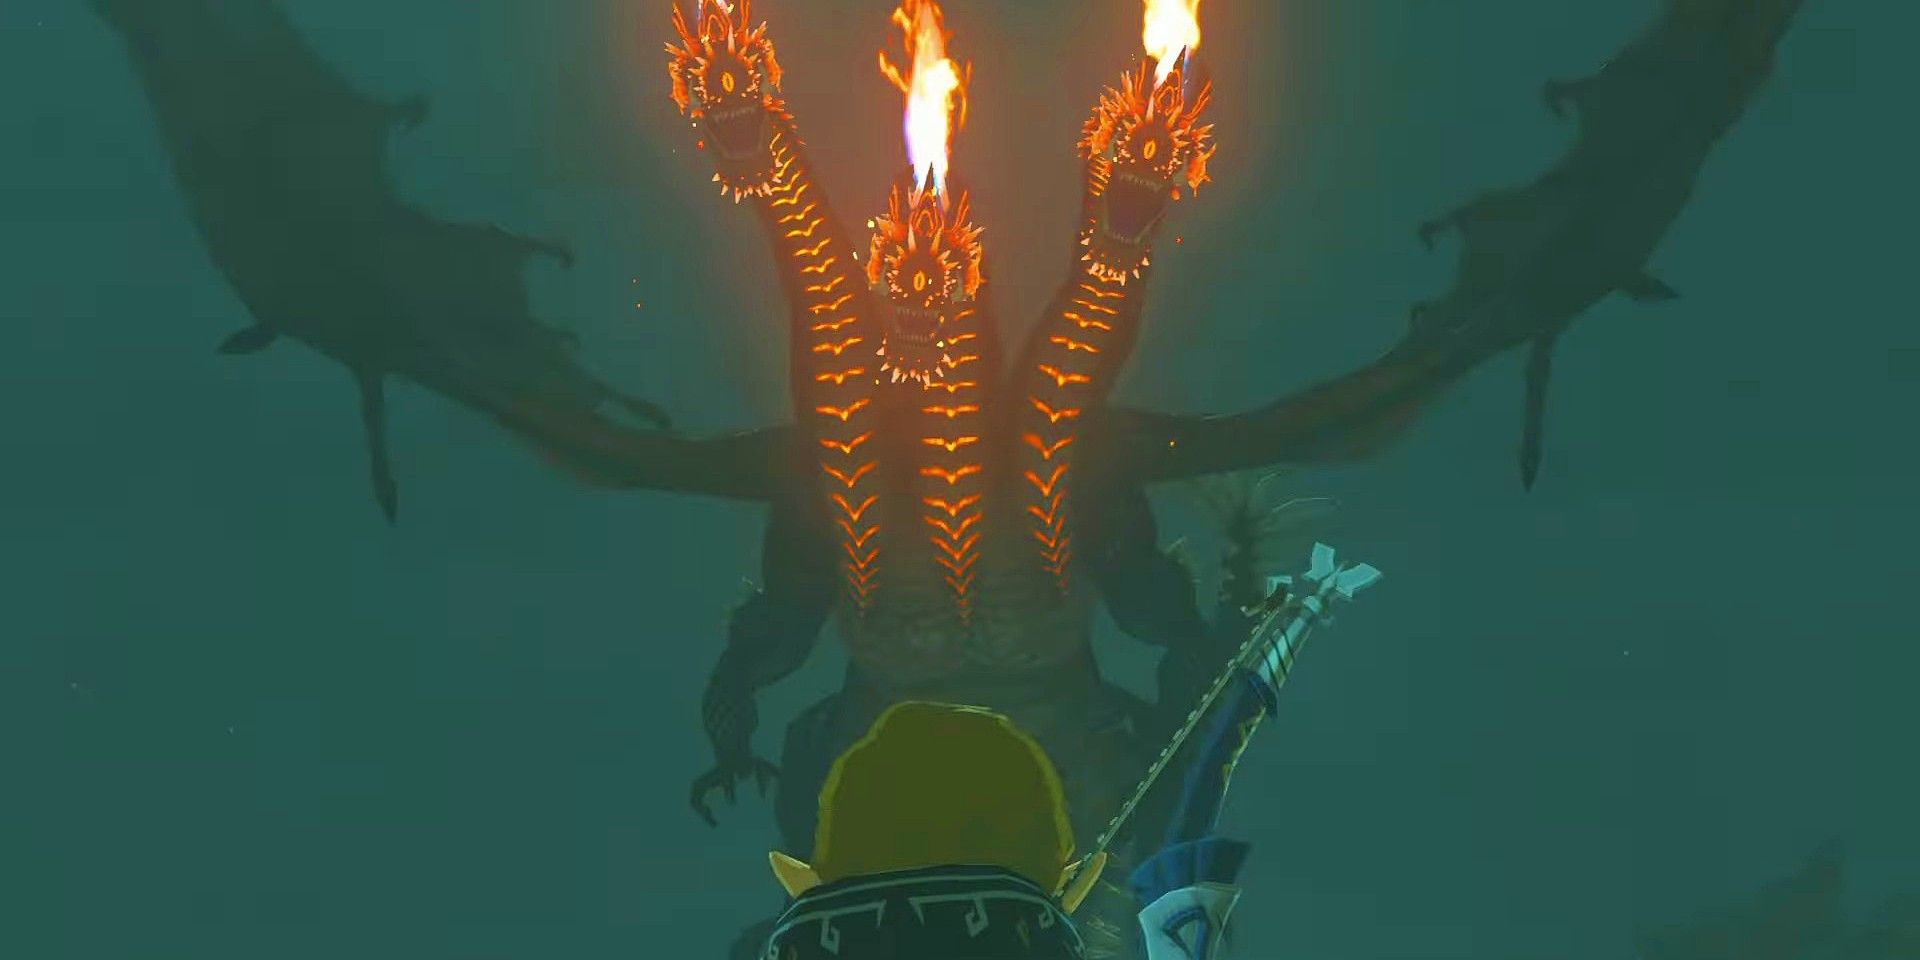 Zelda Tears of the Kingdom's Gleeok roaring in the distance with its three heads while Link stands looking at it.